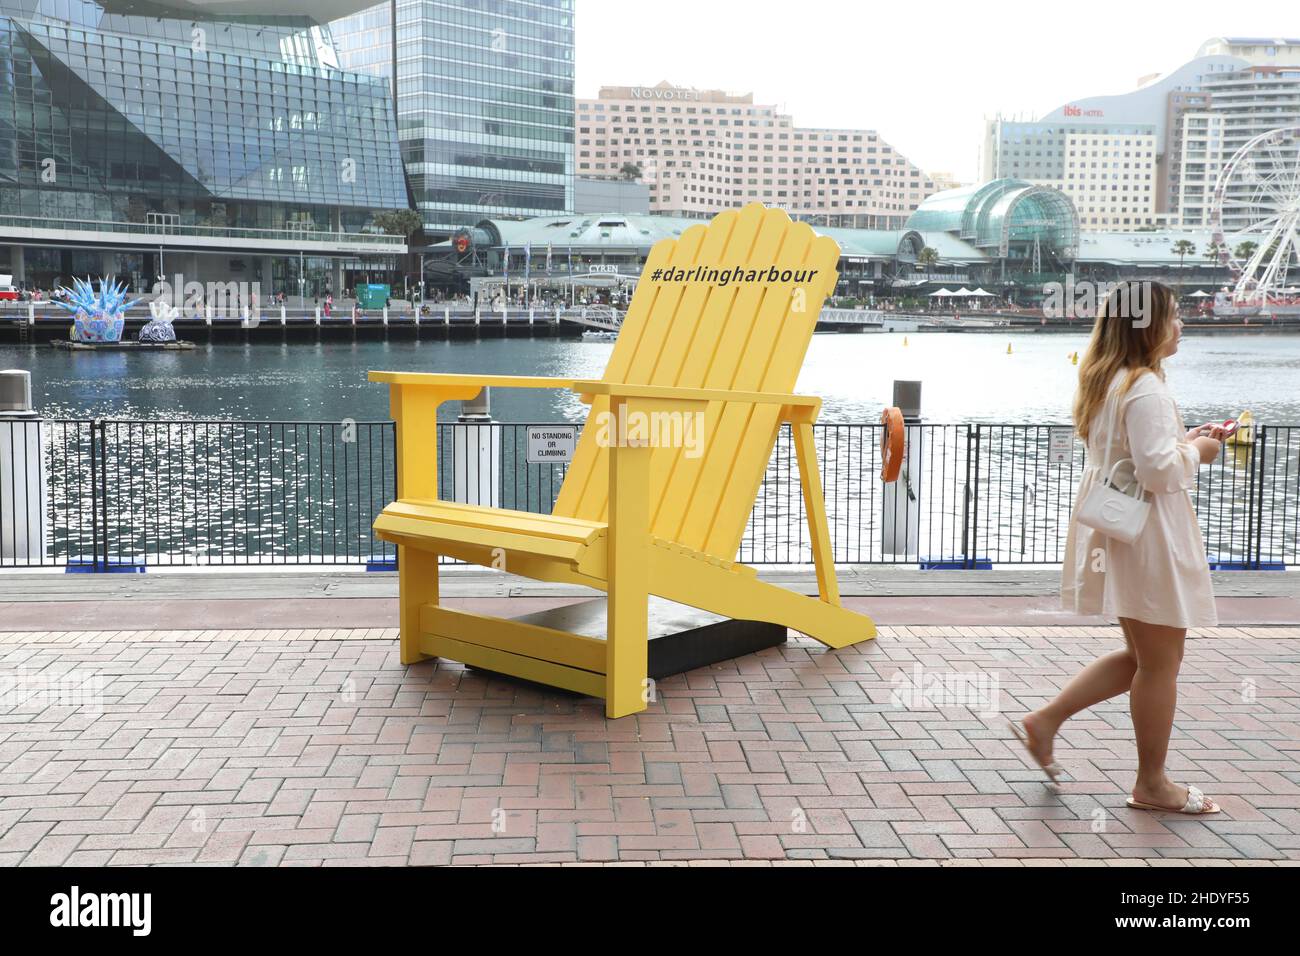 A large yellow deck chair in Darling Harboor, Sydney, Australia Stock Photo  - Alamy